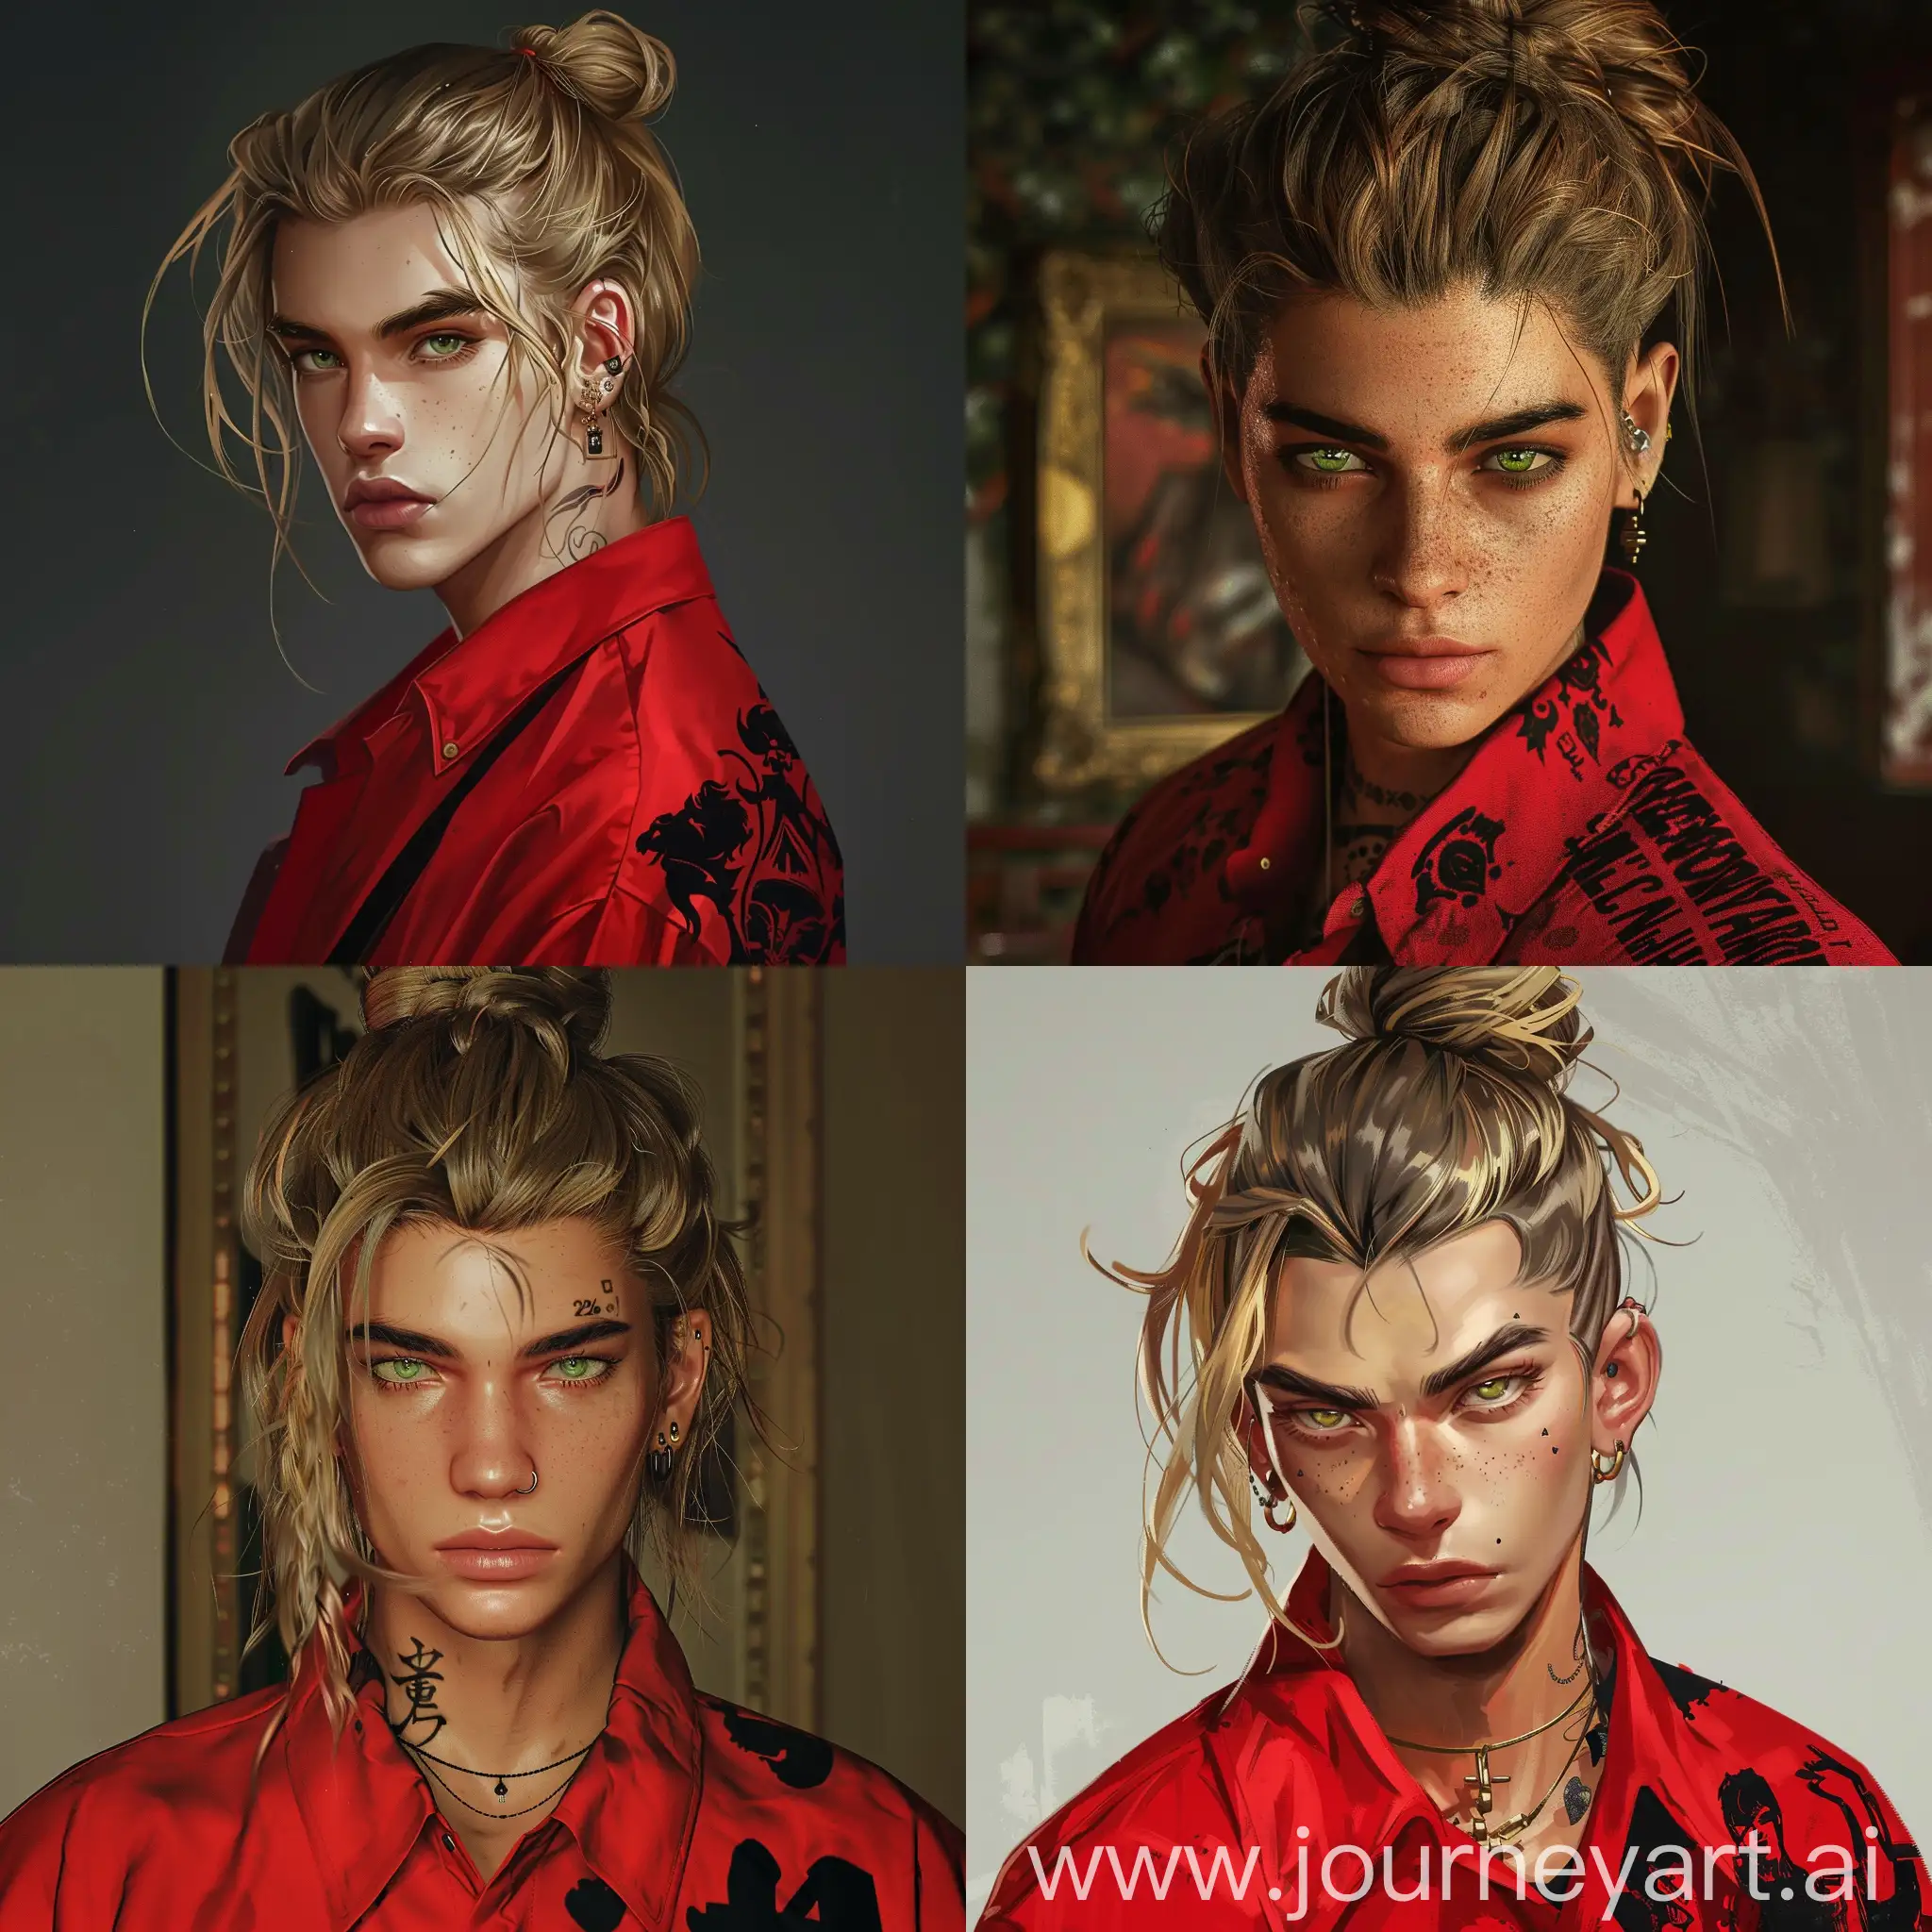 mafia boss, around 20 years old guy with blonde hazel hair, green eyes tied in a bun with some hair remaining loosen. Red shirt with heavy black print on the right side, rich attire. Pierced ears. a little feminine face features